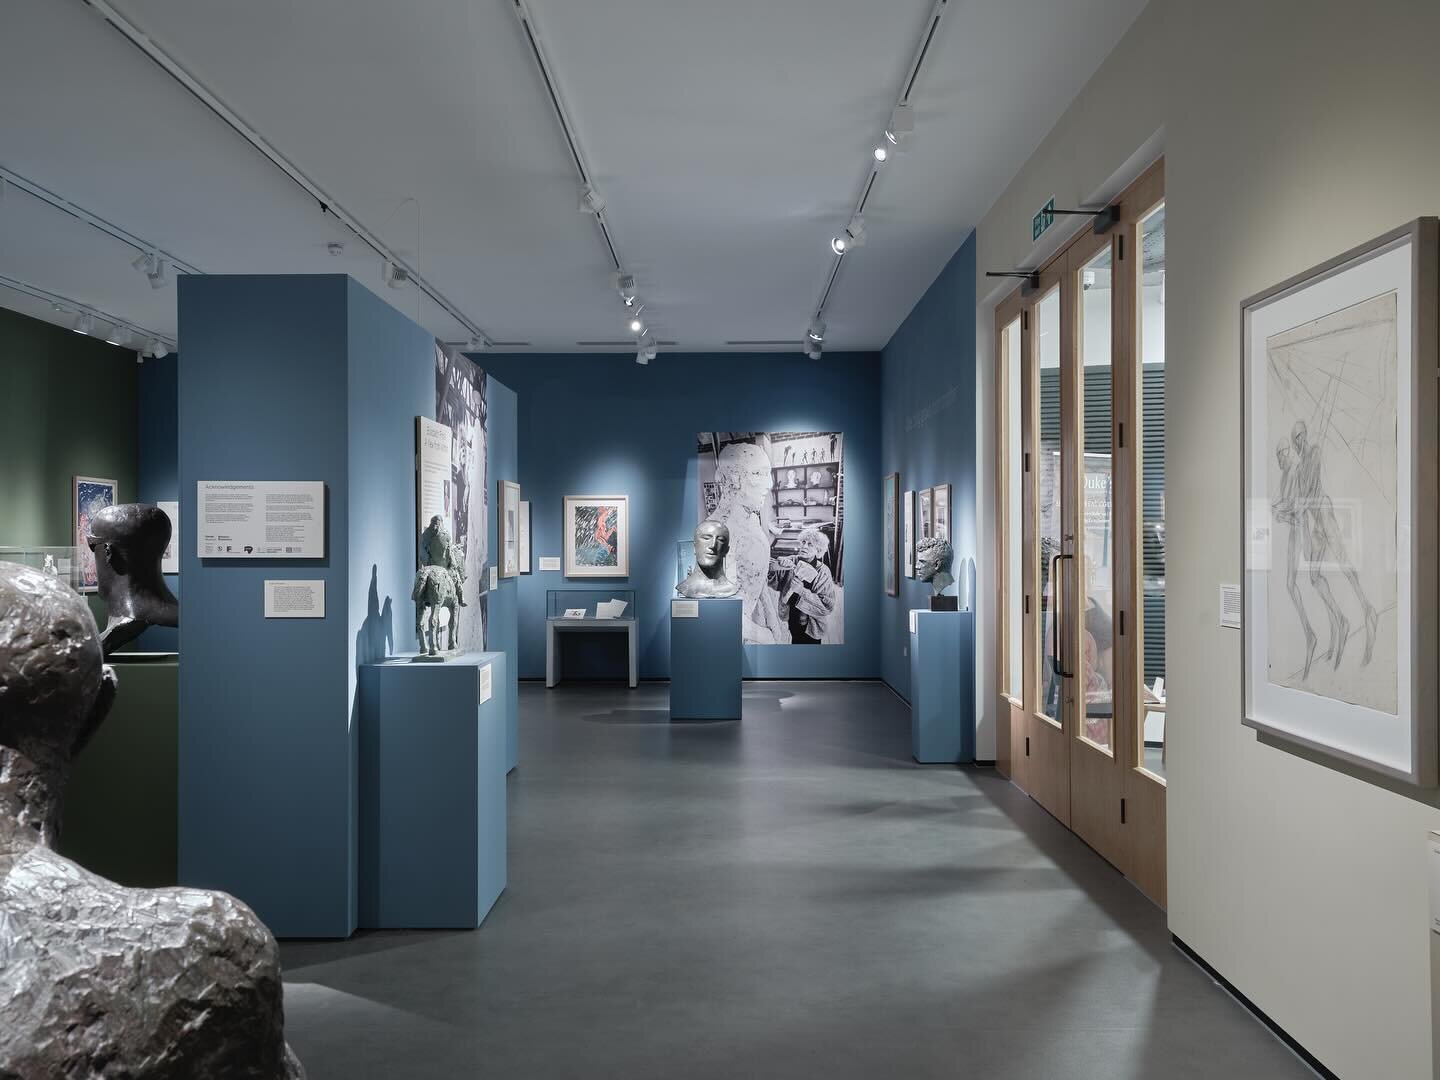 Elisabeth Frink, Drawn to Nature at the Dorset Museum and Art Gallery exhibition design with @dontwillkit on graphics and fabricated by @madebyjonlloyd 

Paint kindly supplied by @edwardbulmerpaint 

📸 Thomas Adank 

&copy;The Elisabeth Frink Estate